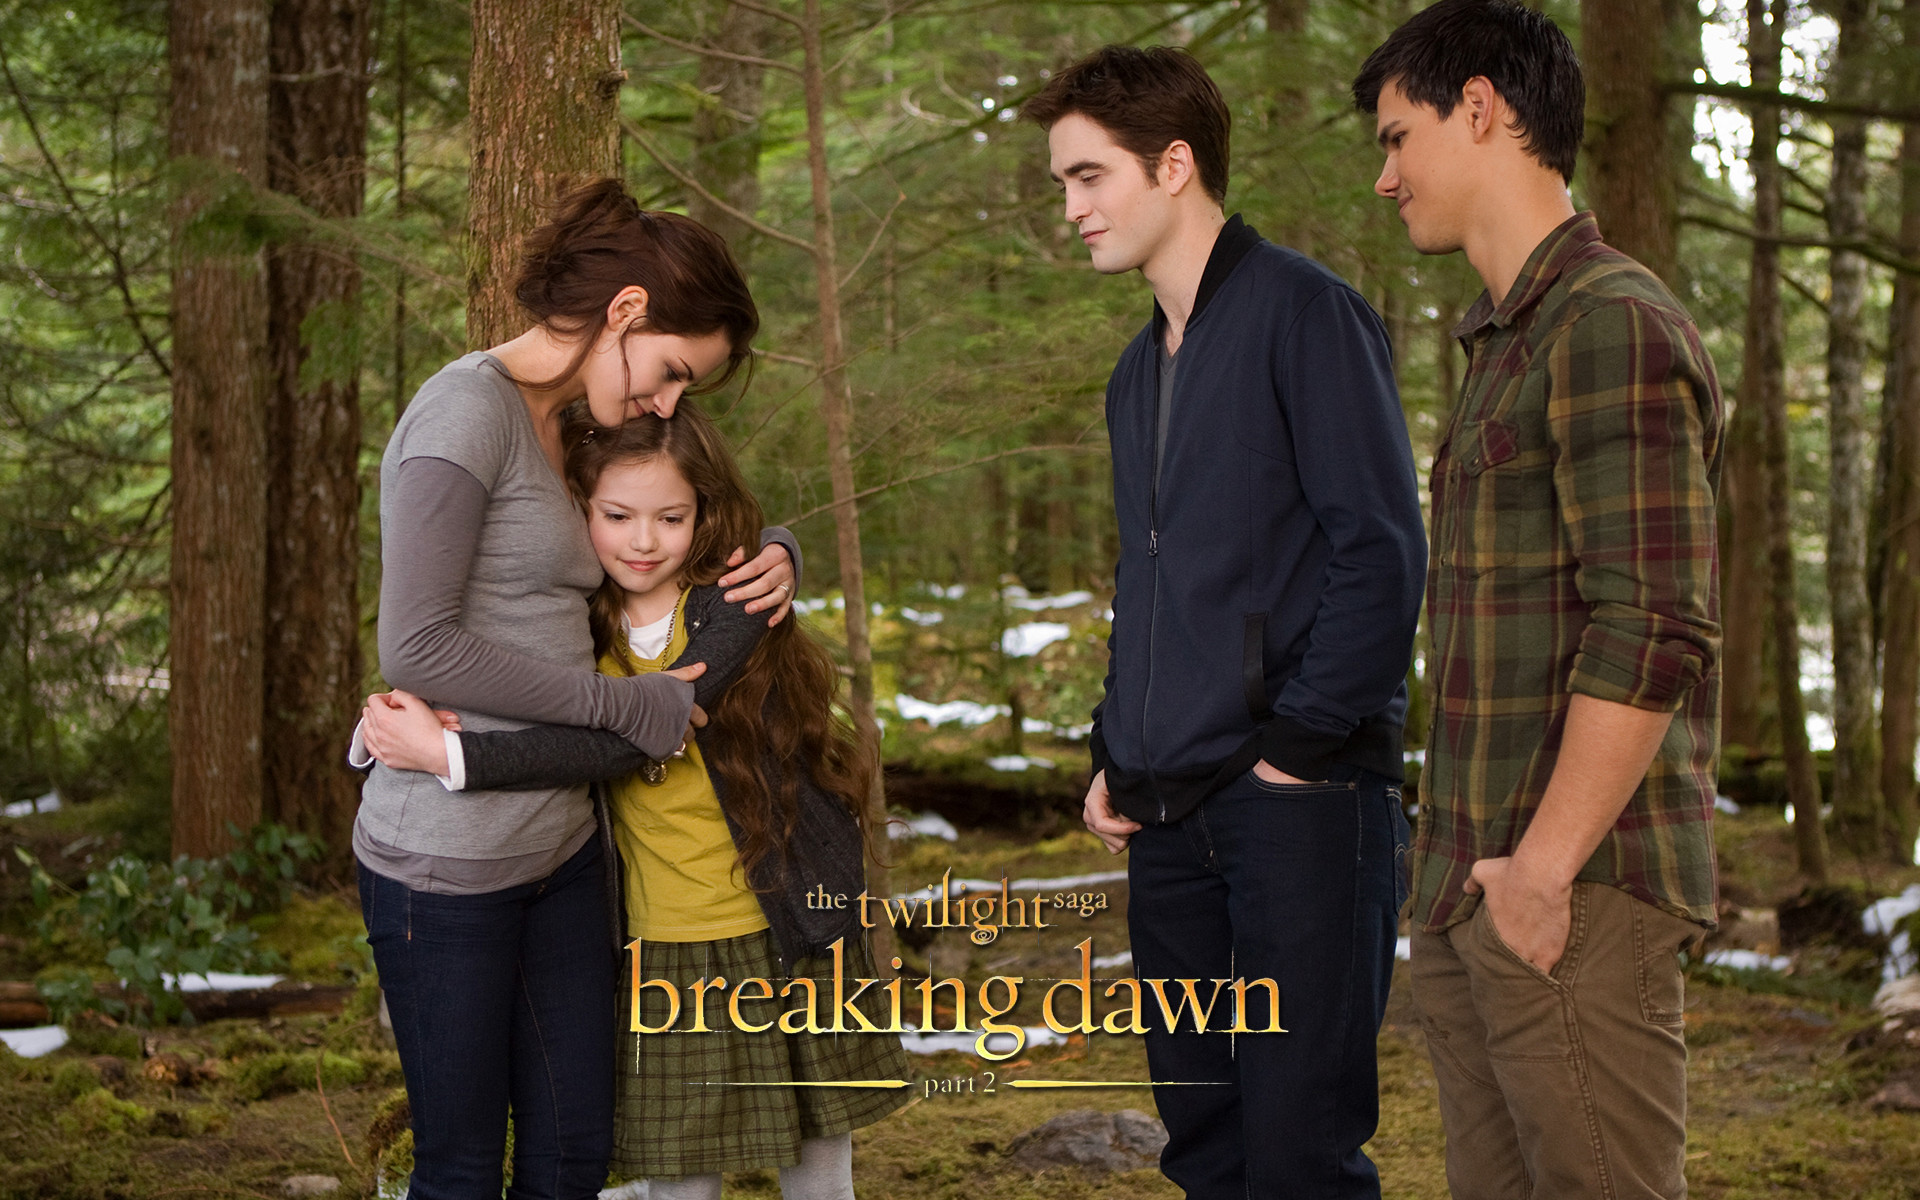 1920x1200 The Twilight Saga: Breaking Dawn Part II images BD part 2 wallpaper HD  wallpaper and background photos